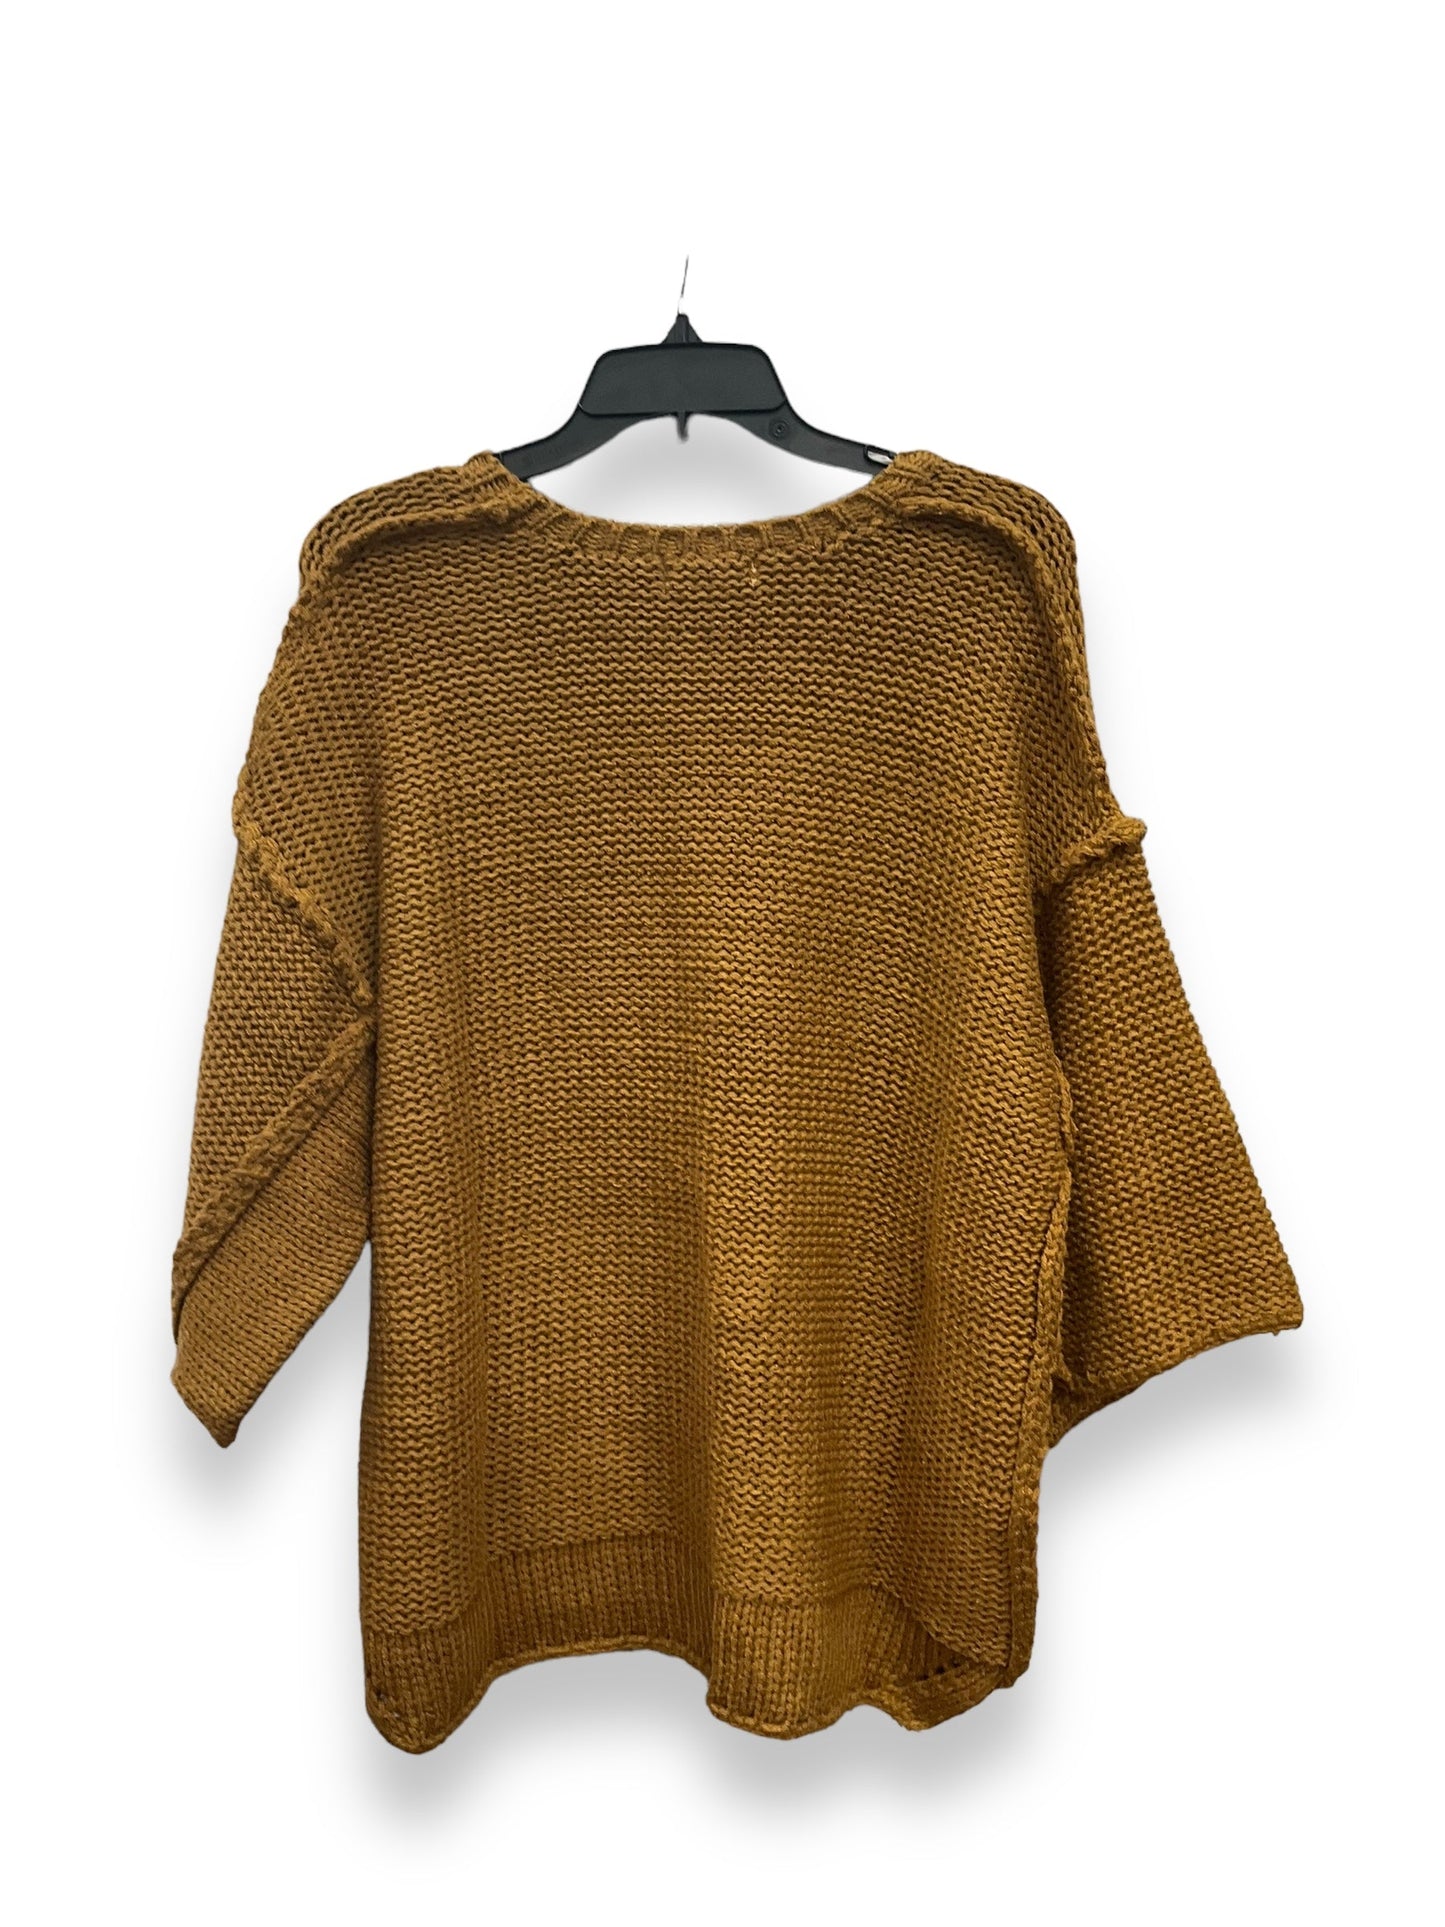 Gold Sweater Easel, Size M